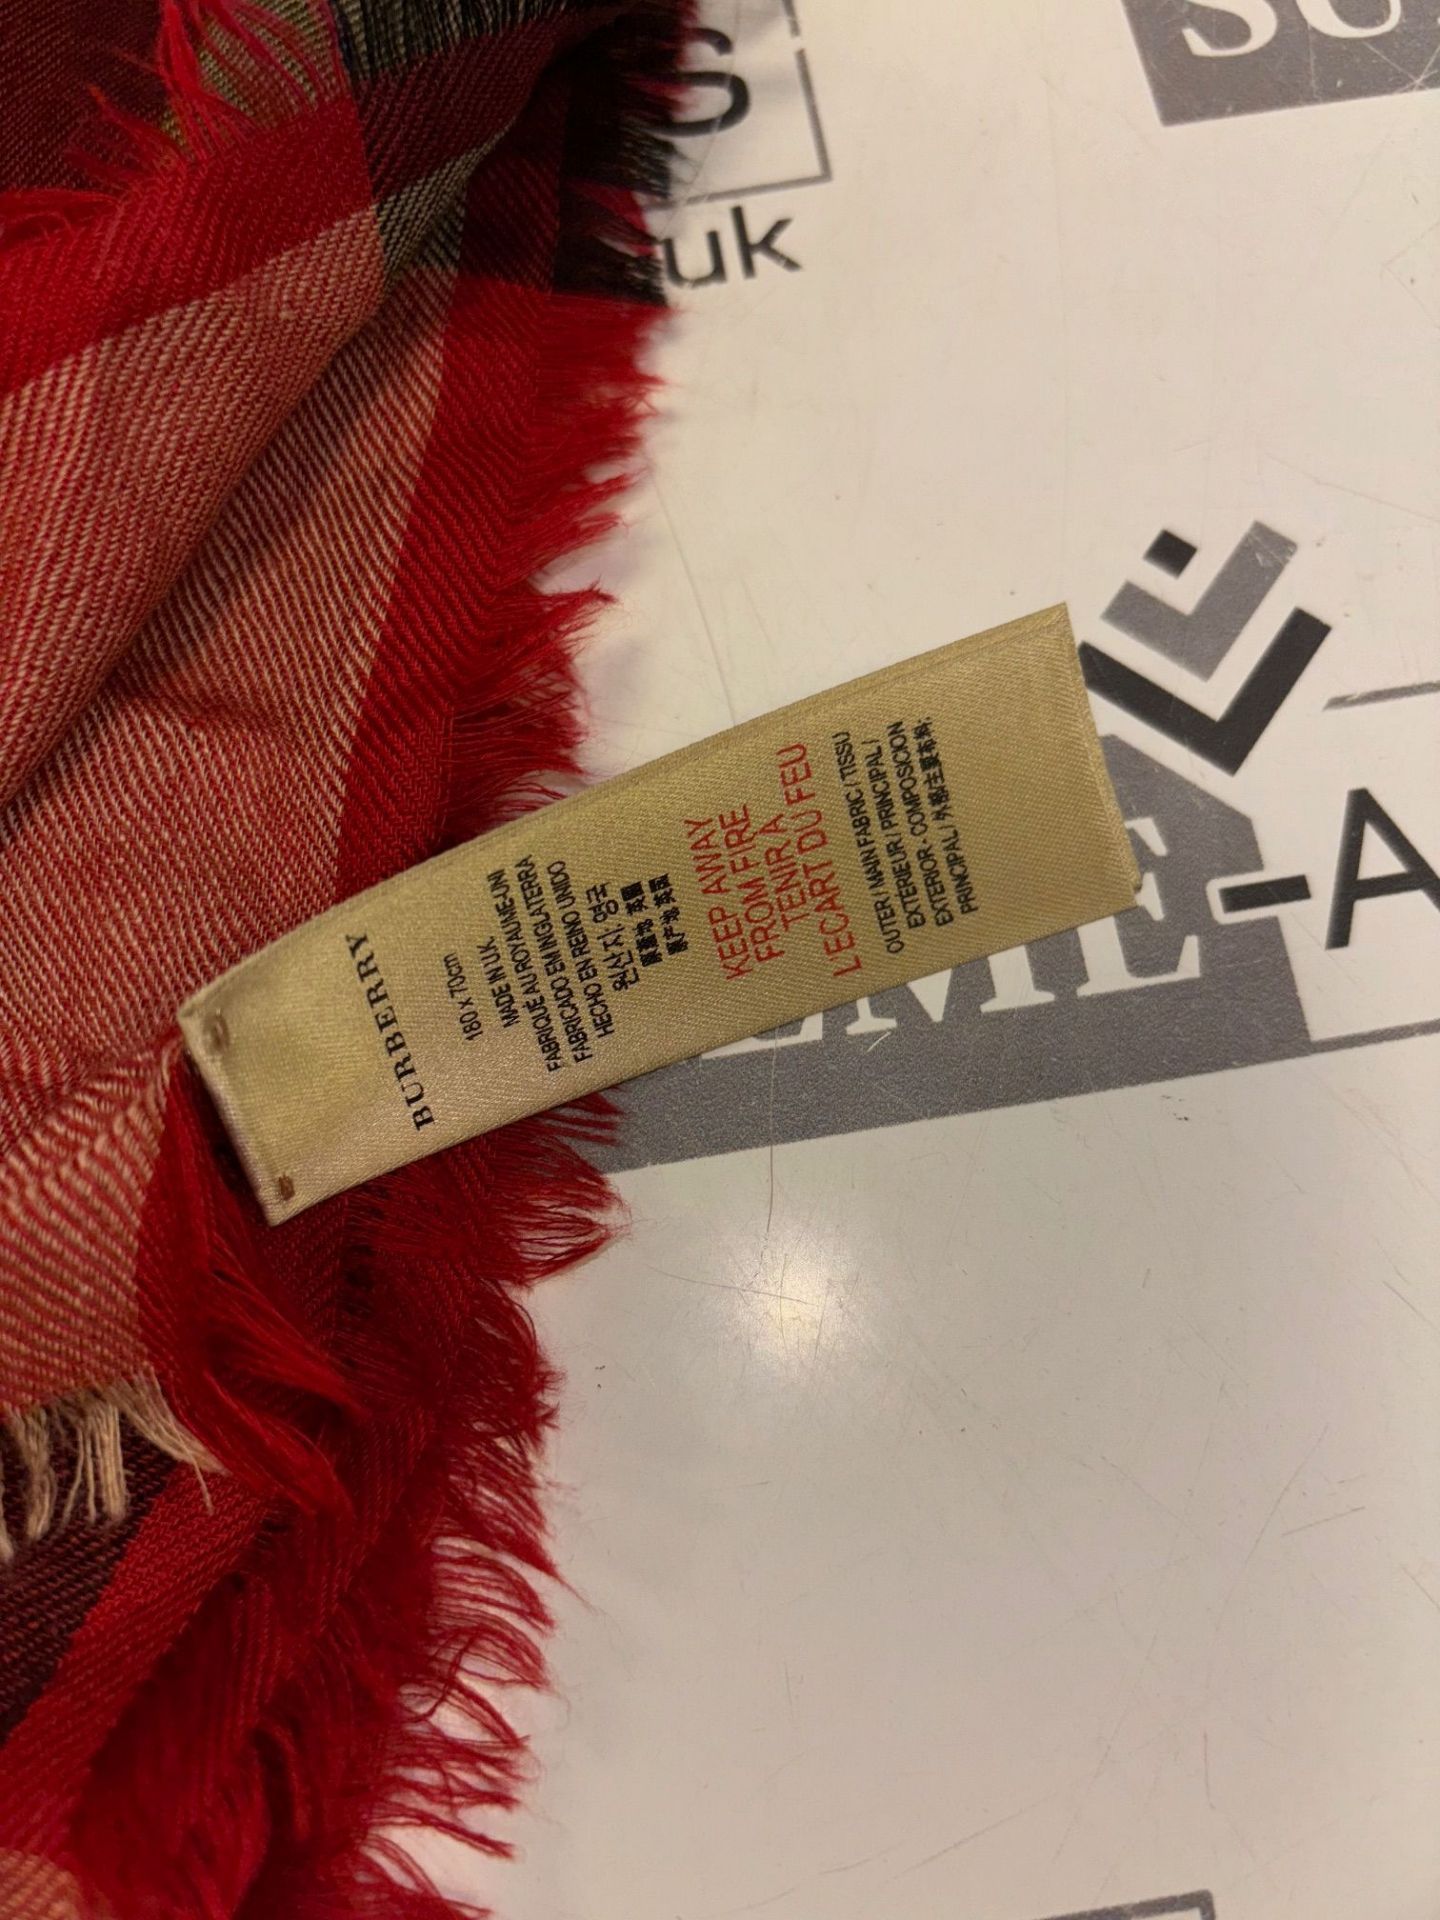 Genuine Burberry: Vintage Check Scarf 100% Cashmere red Personalised: SDT 13/28 - Image 3 of 3